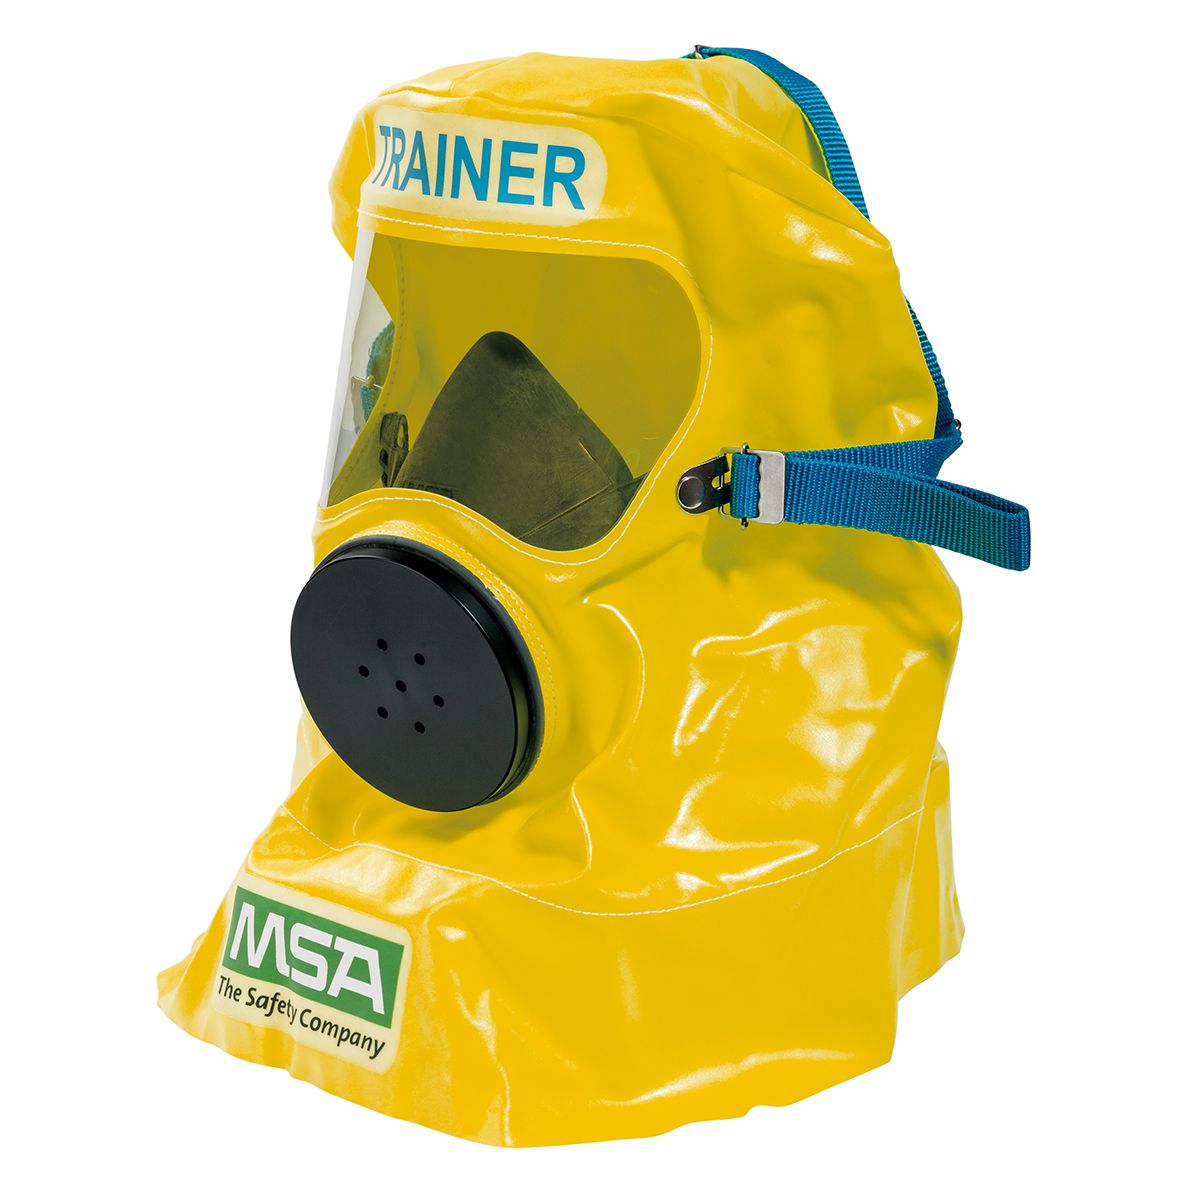 MSA Fire Escape Training Hood S-CAP Trainer, without filter, in bag